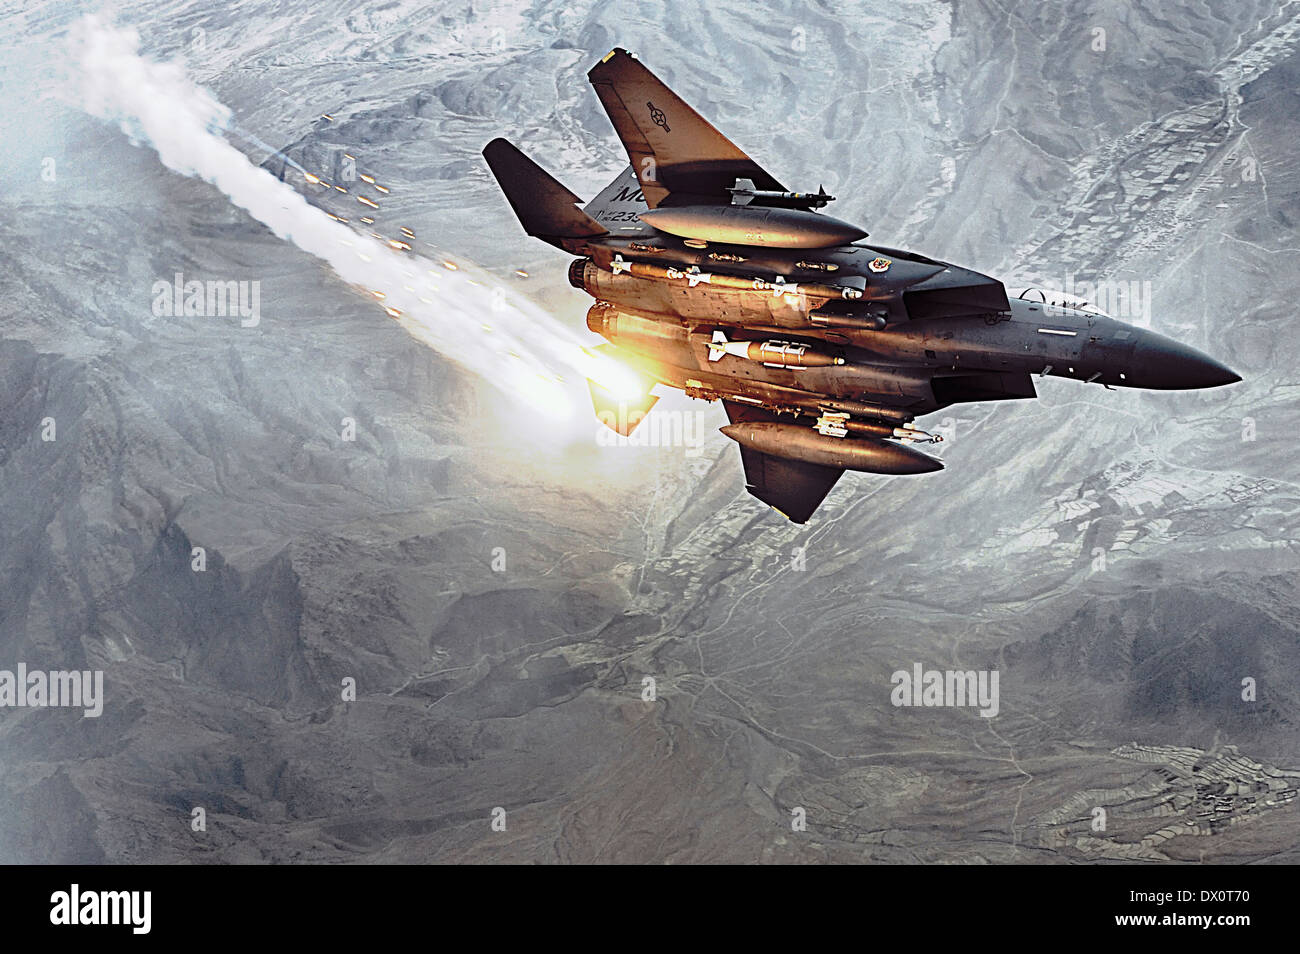 A US Air Force F-15E Strike Eagle from the 391st Expeditionary Fighter Squadron Bagram Air Base deploys heat decoys during a combat patrol December 15, 2008 over Helmand province, Afghanistan. Stock Photo